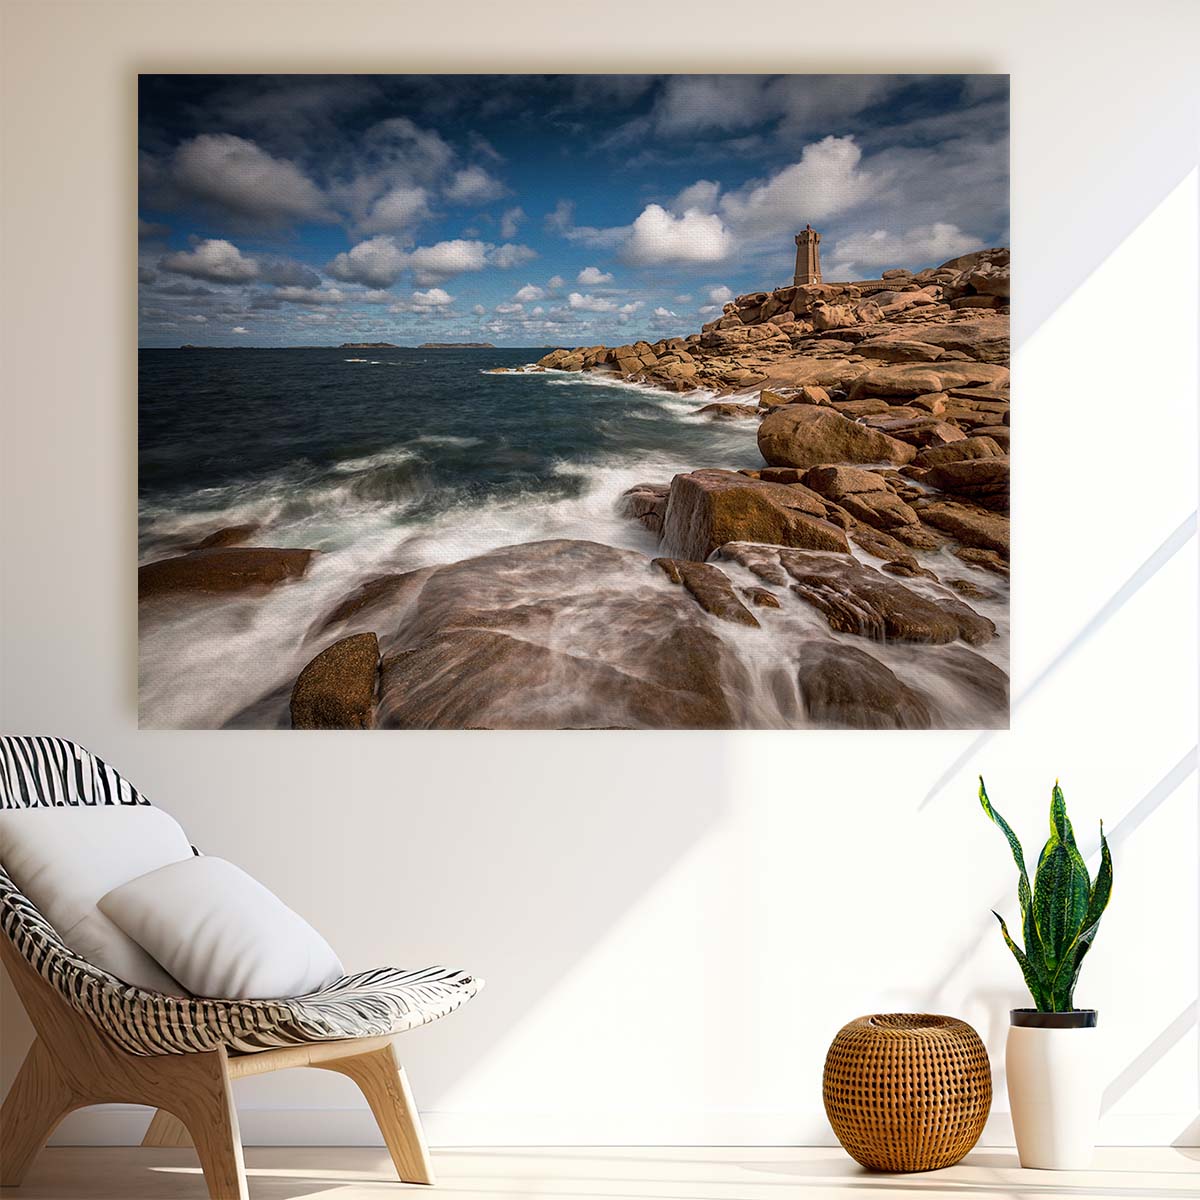 Brittany Lighthouse & Cliffs Seascape Wall Art by Luxuriance Designs. Made in USA.